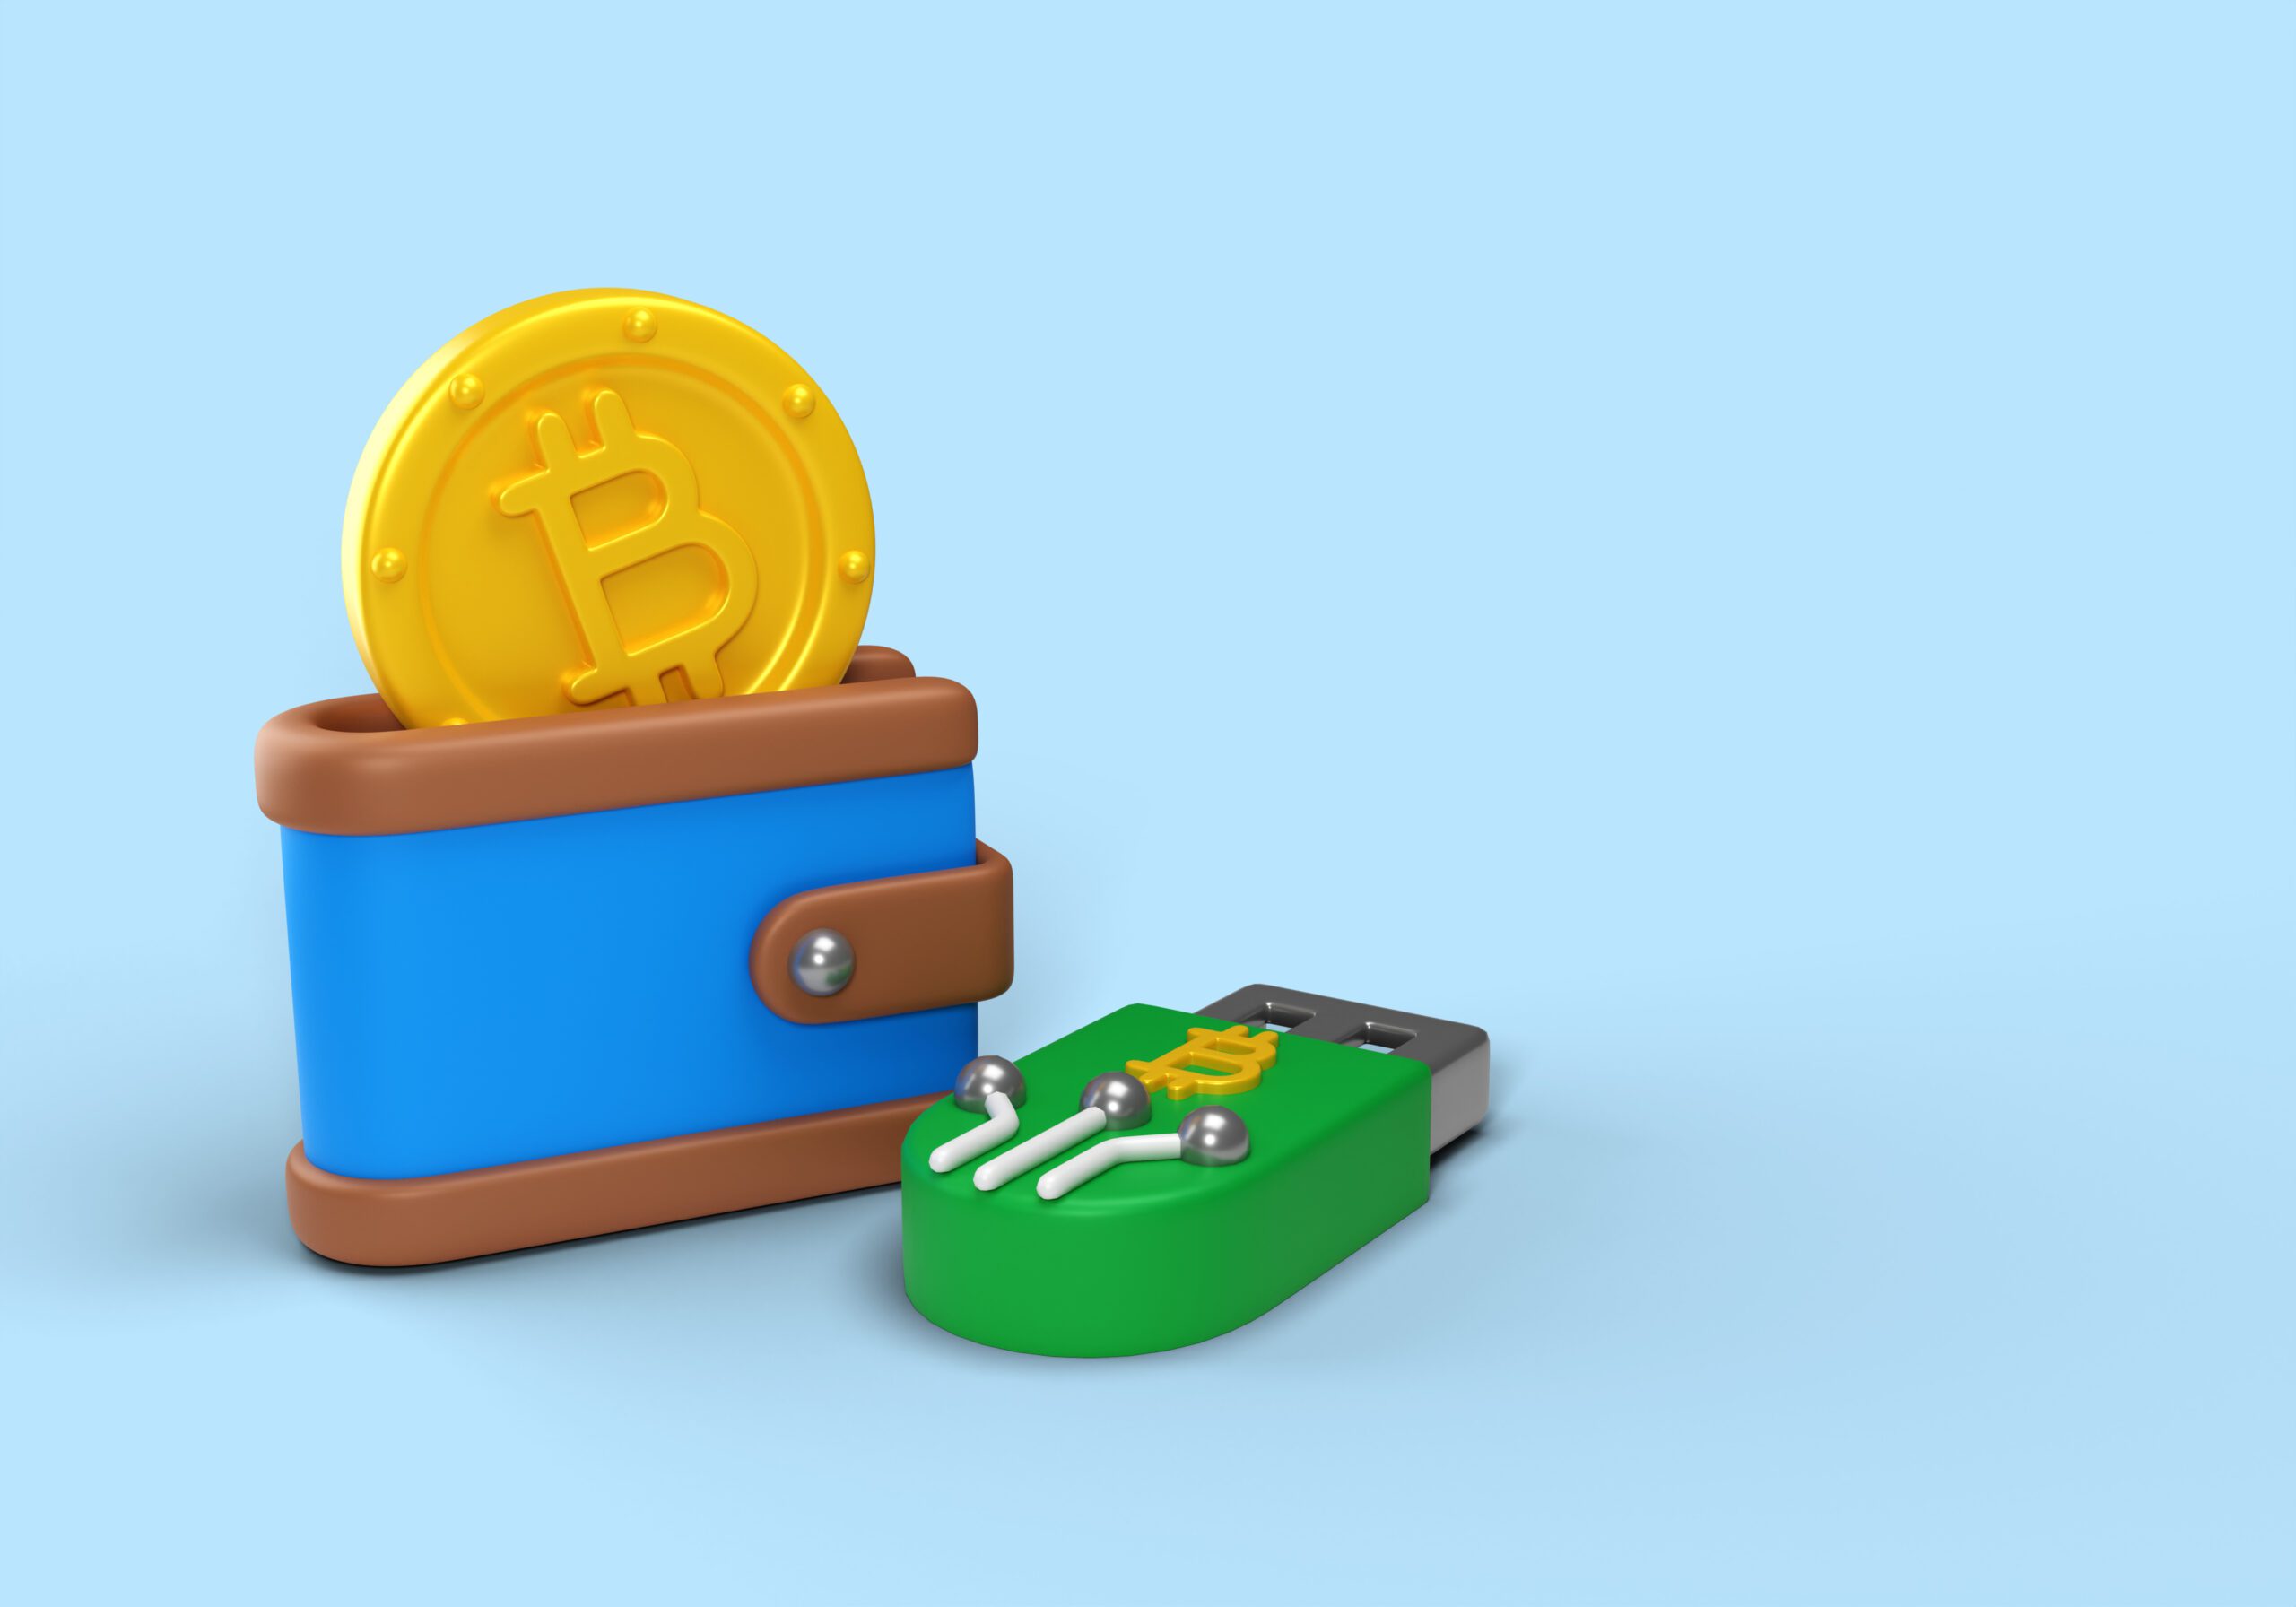 Image portraying a cryptocurrency wallet